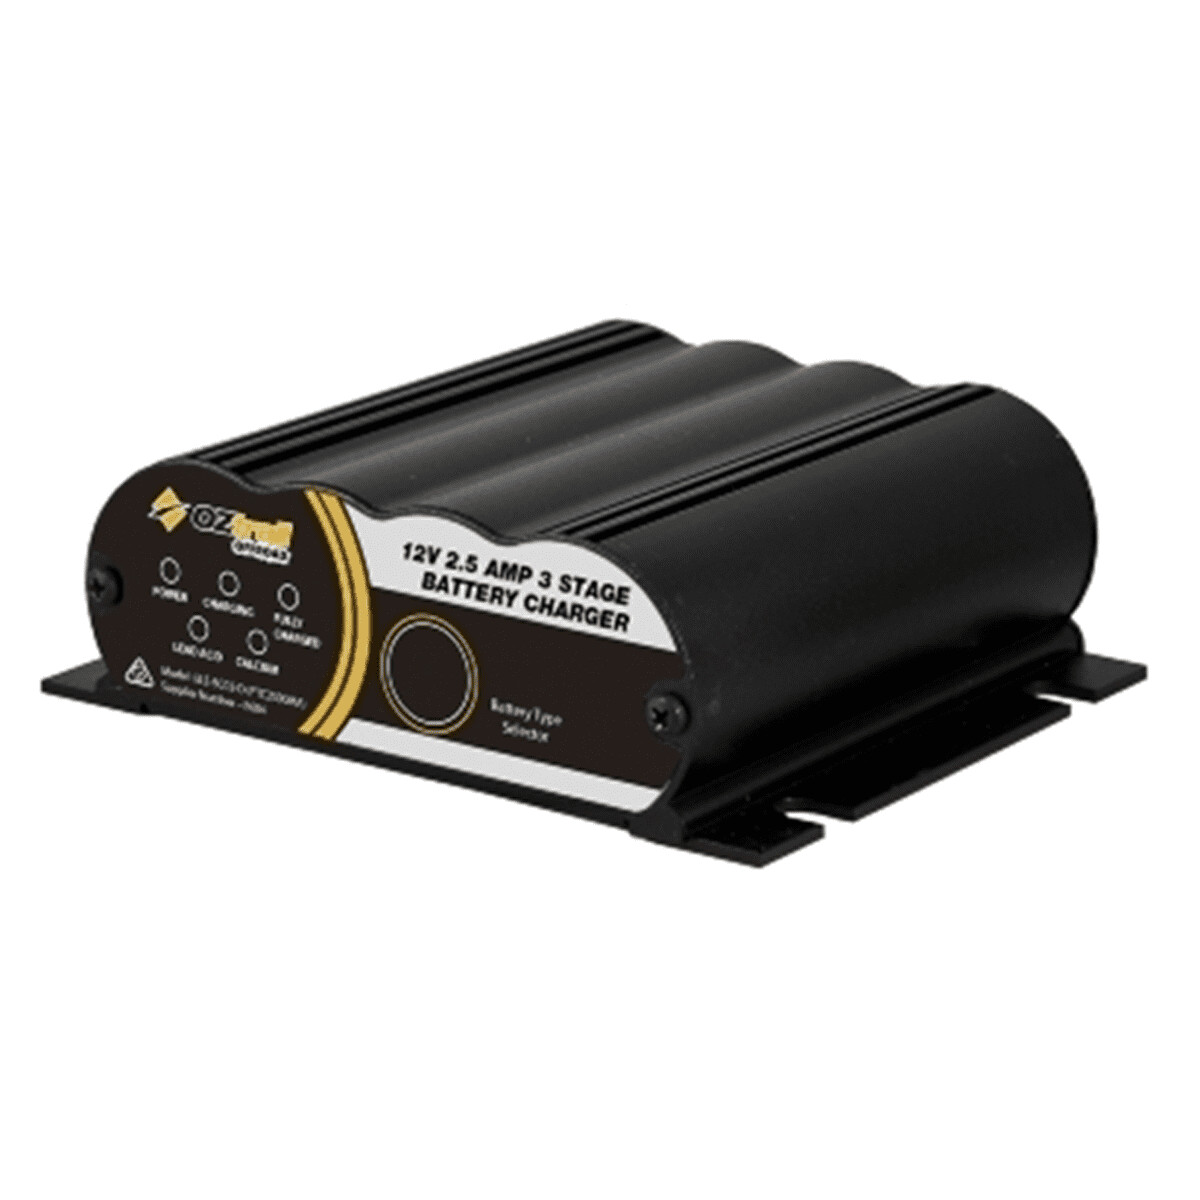 12v 2.5 AMP 3 STAGE BATTERY CHARGER (WAS $69.90 NOW $39.90)